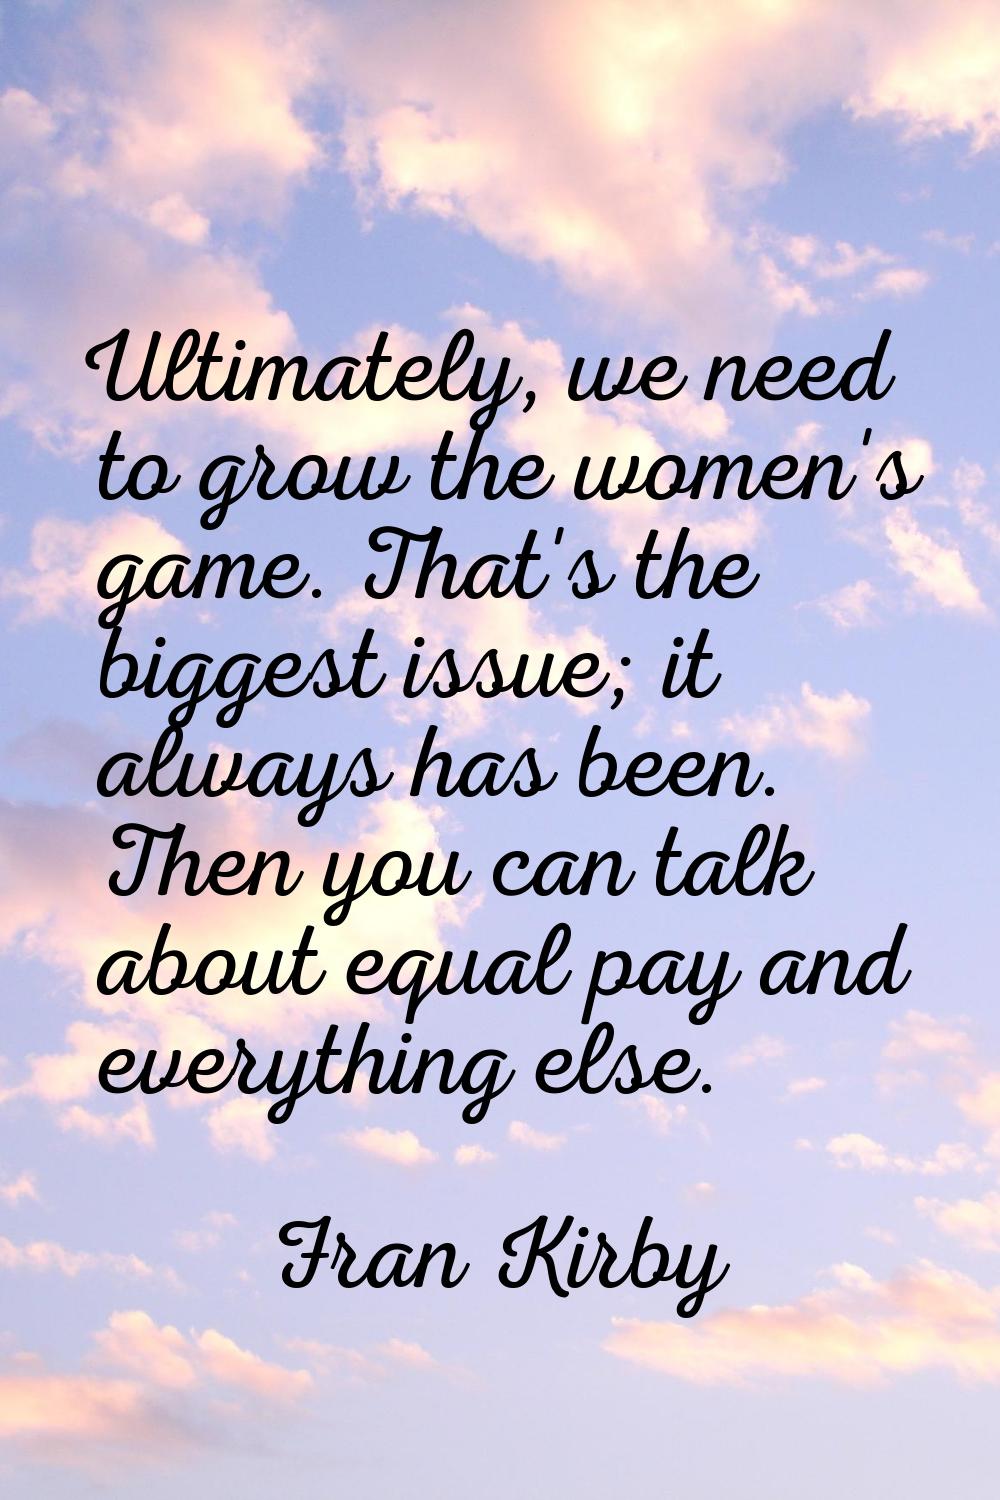 Ultimately, we need to grow the women's game. That's the biggest issue; it always has been. Then yo